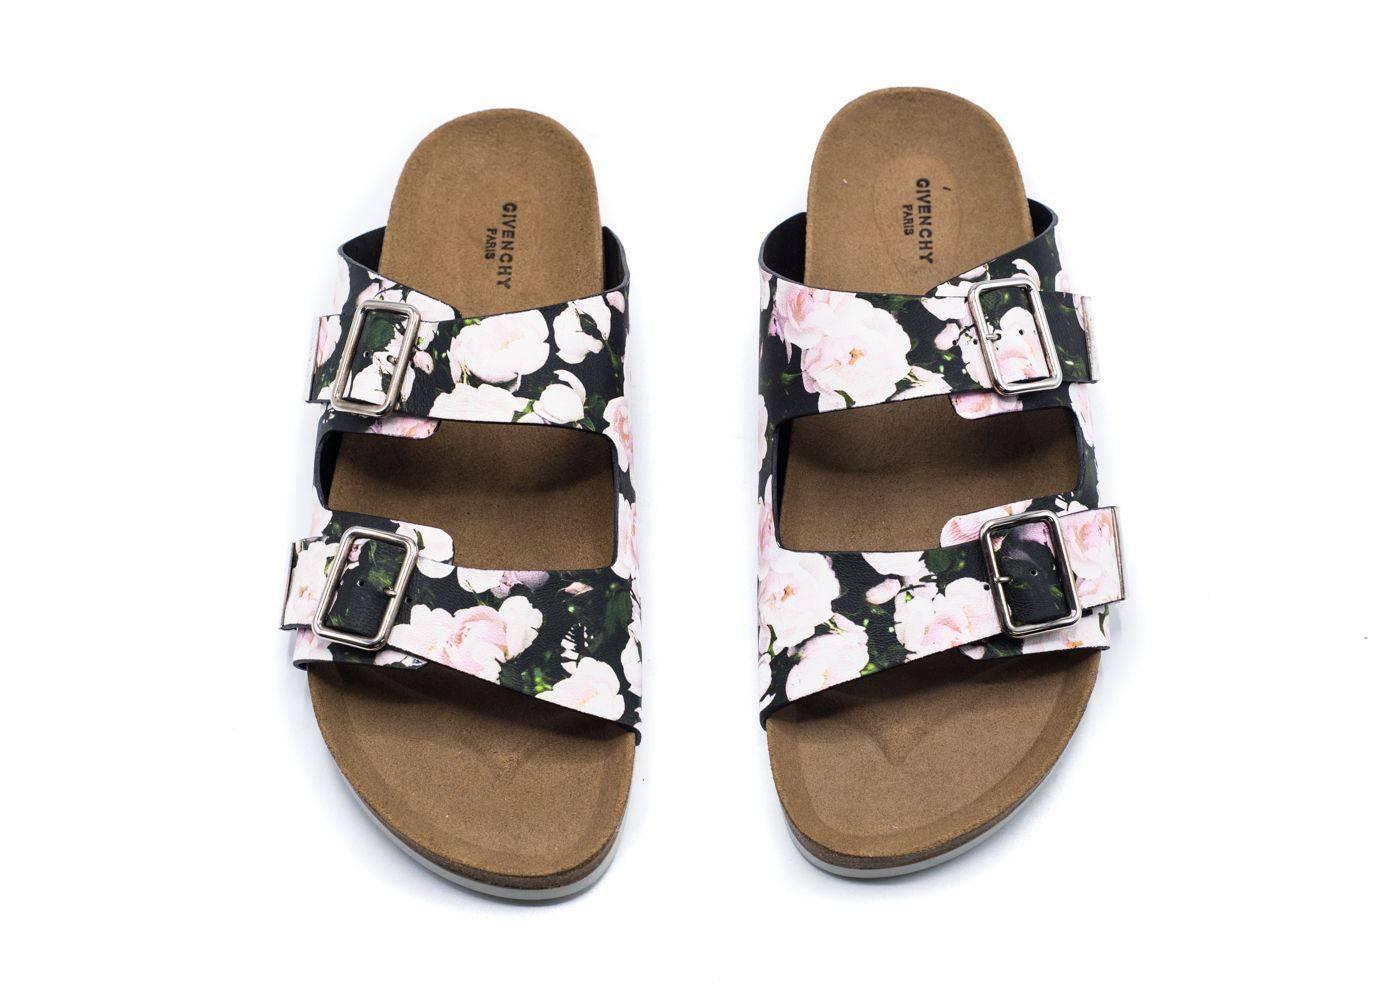 Summer is finally here! Grab these trendy floral slippers to your next travel destination or beach spot for that beach fashion vibe to your wardrobe.

Composition: 100% Calfskin Leather
Leather Lining
Slides / Slippers Silhouette
Slip On